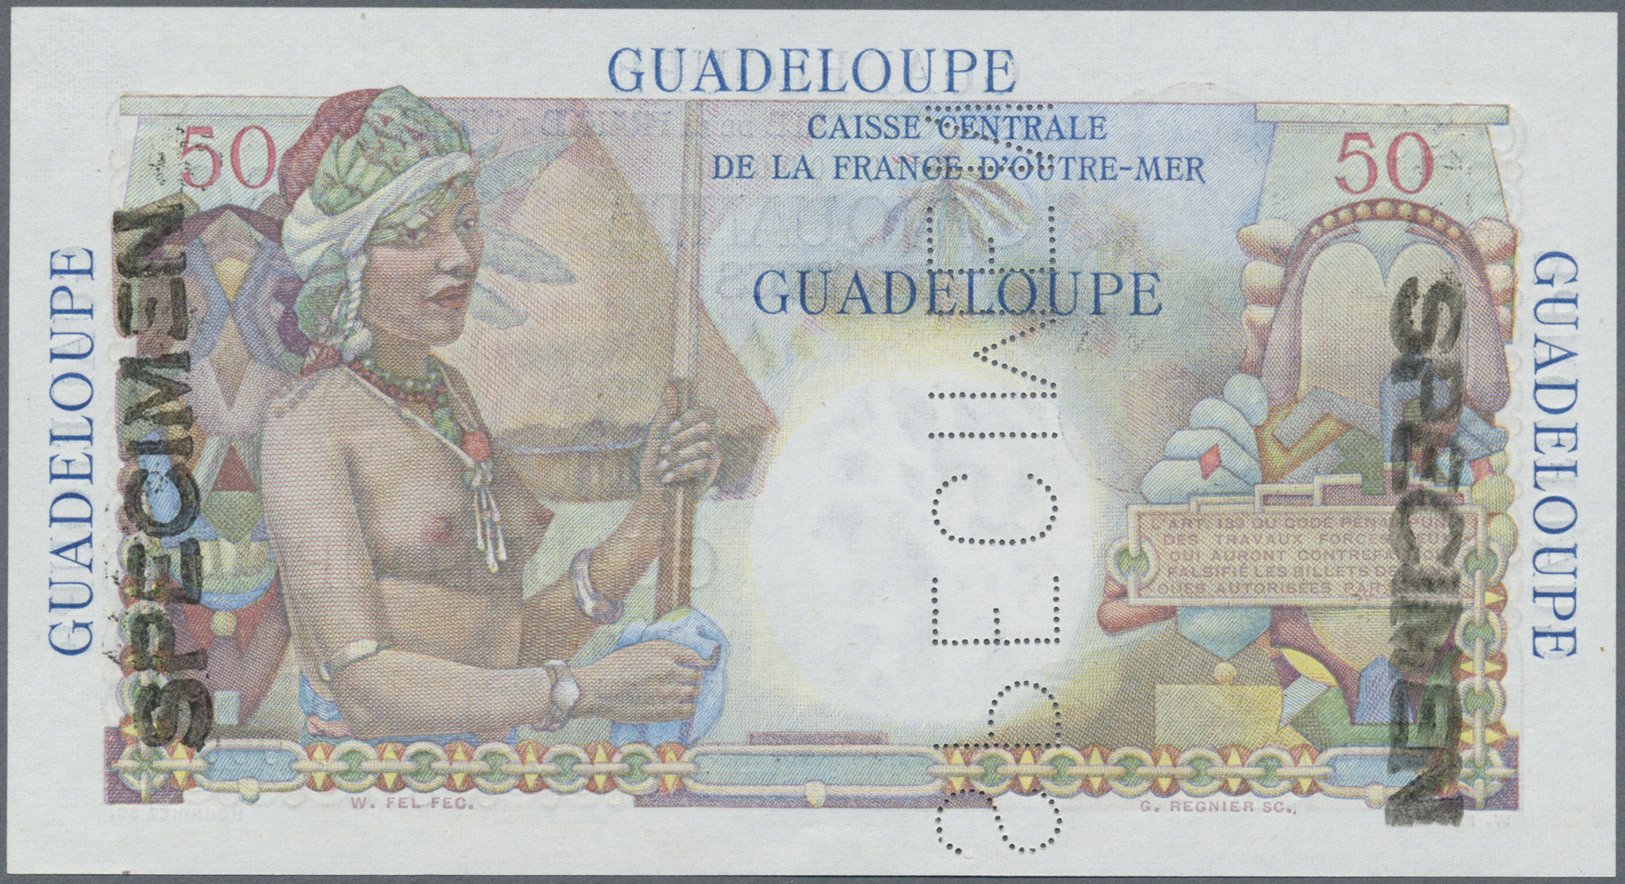 00956 Guadeloupe: 50 Francs ND Specimen P. 34s, Perforated SPECIMEN In Center, Stamped SPECIMEN At Borders, Zero Serial - Other - America